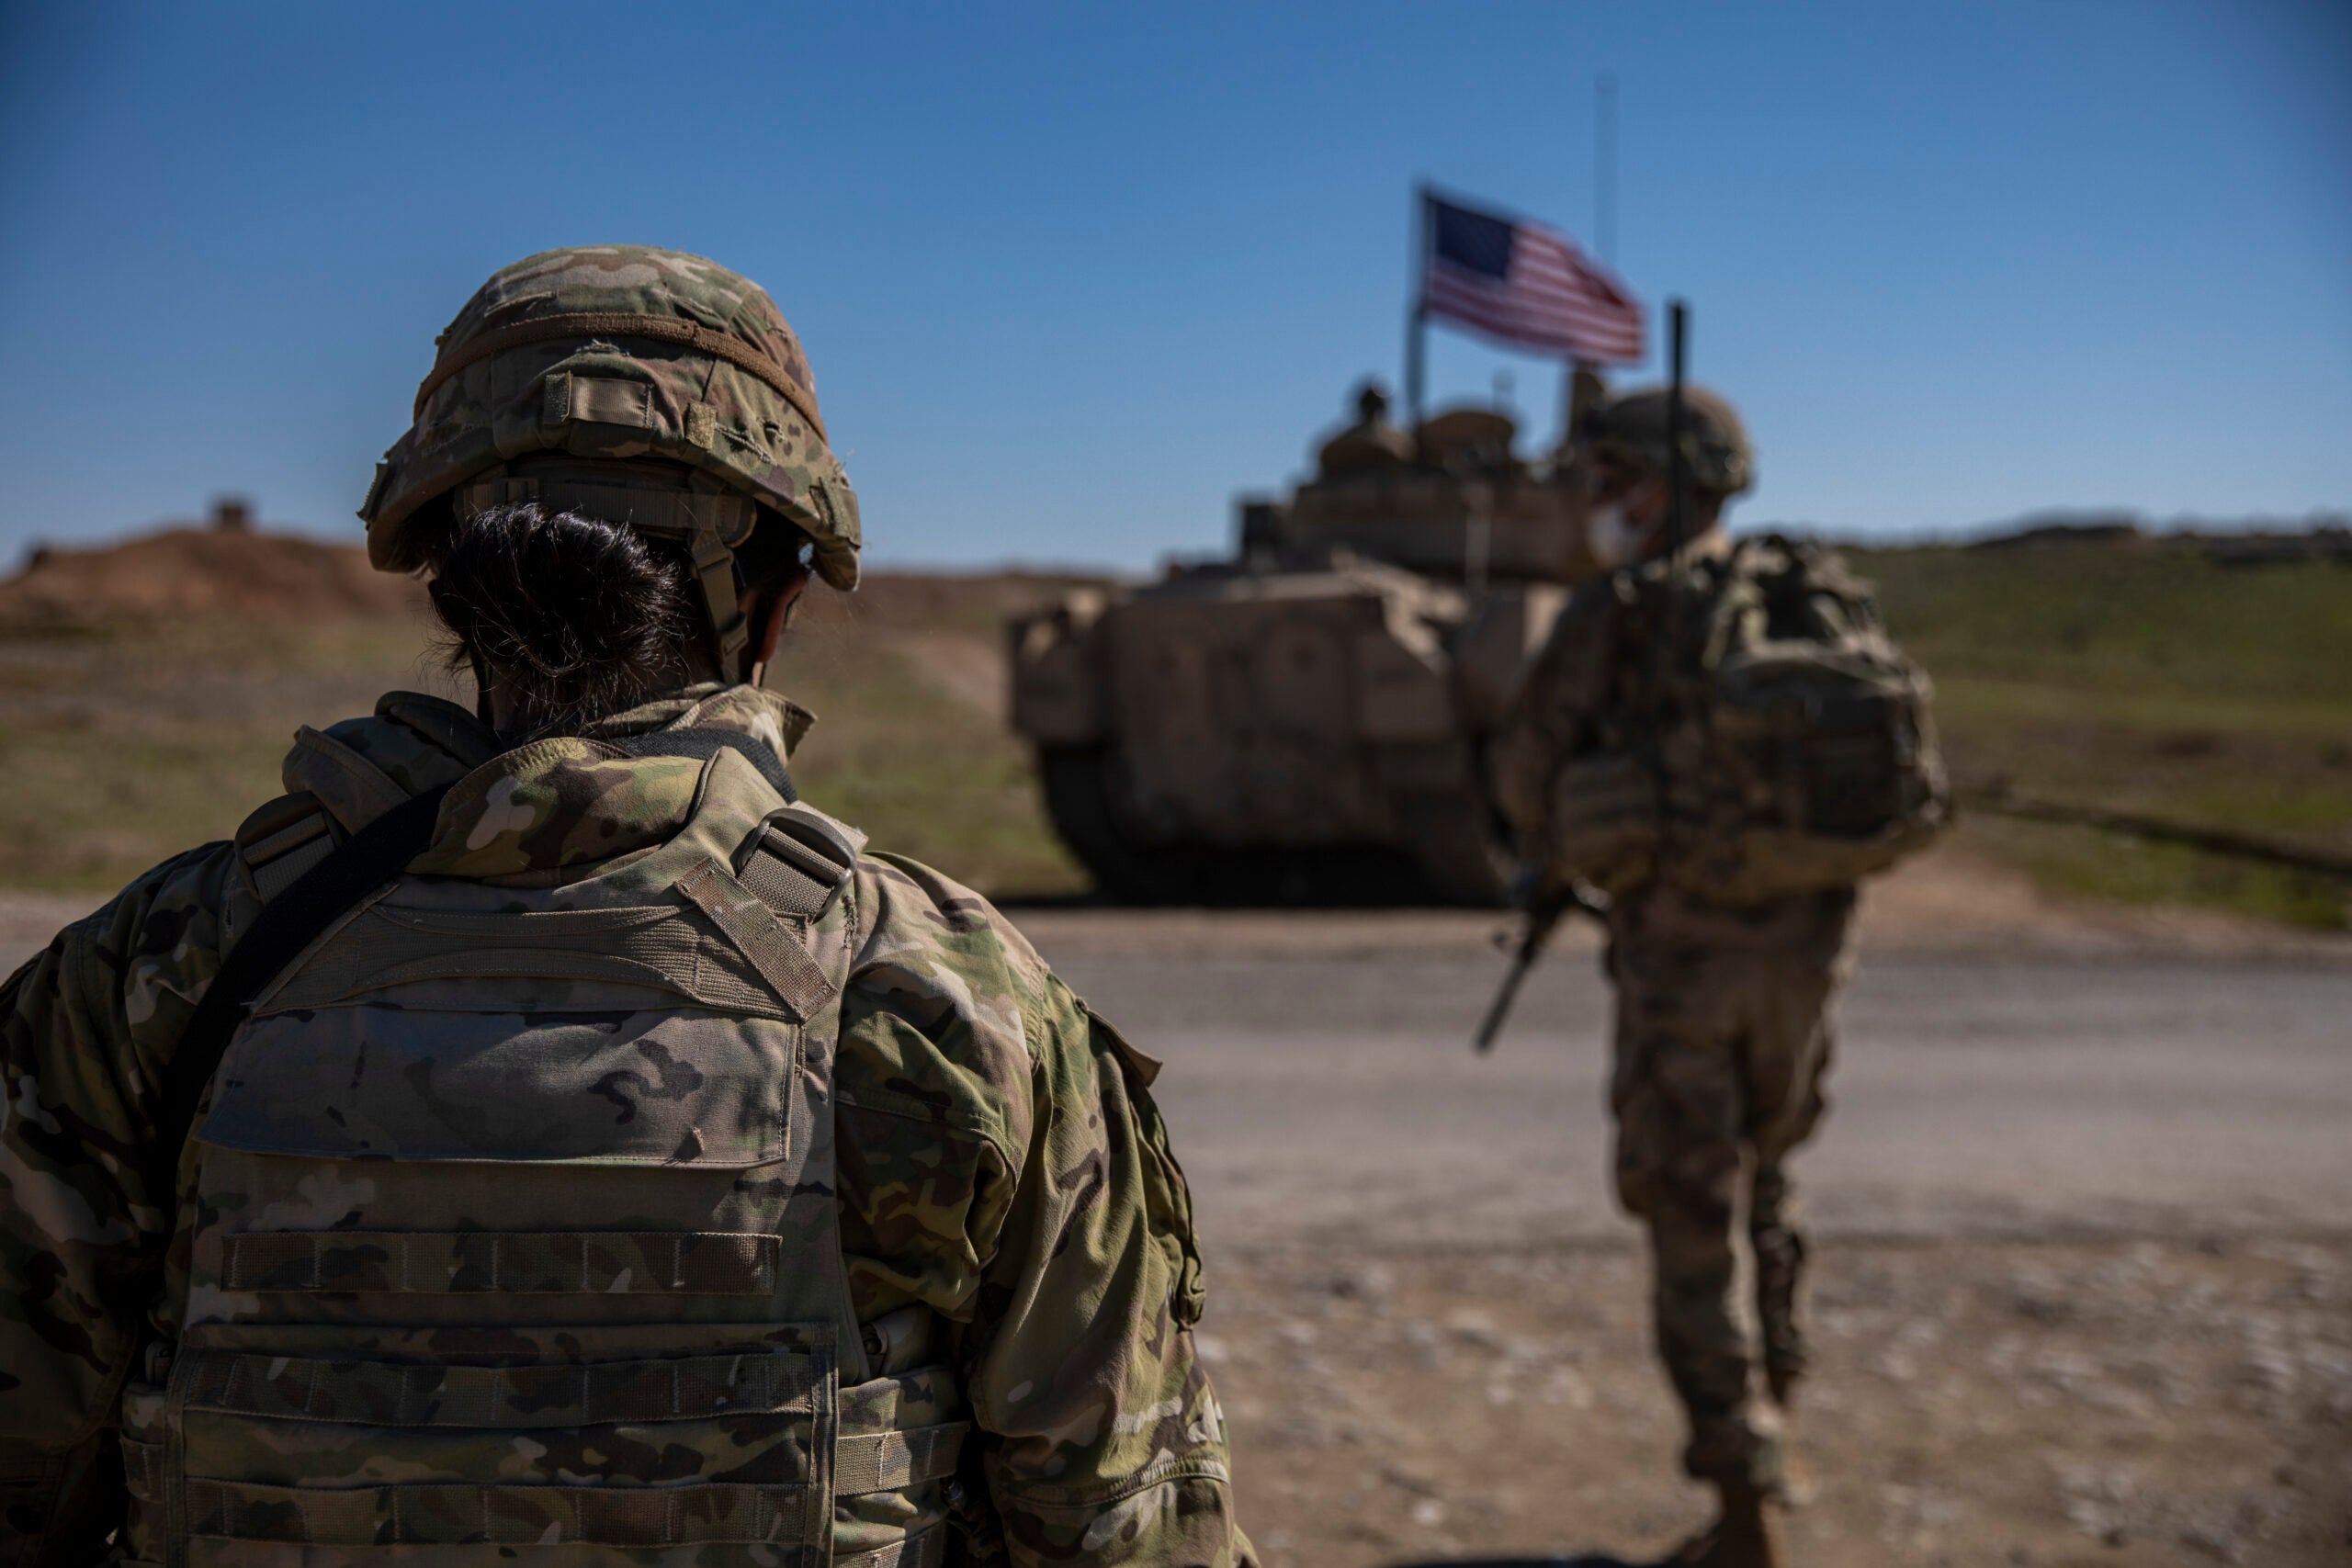 U.S. Soldiers, with Alpha Company, 1st Battalion, 6th Infantry Regiment, 2nd Armored Brigade Combat Team, 1st Armored Division, conduct area reconnaissance in the Central Command (CENTCOM) area of responsibility, Feb. 22, 2021. The soldiers are in Syria to support the Combined Joint Task Force-Operation Inherent Resolve (CJTF-OIR) mission. CJTF remains committed to working by, with, and through our partners to ensure the enduring defeat of Daesh. (U.S. Army photo by Spc. Jensen Guillory)